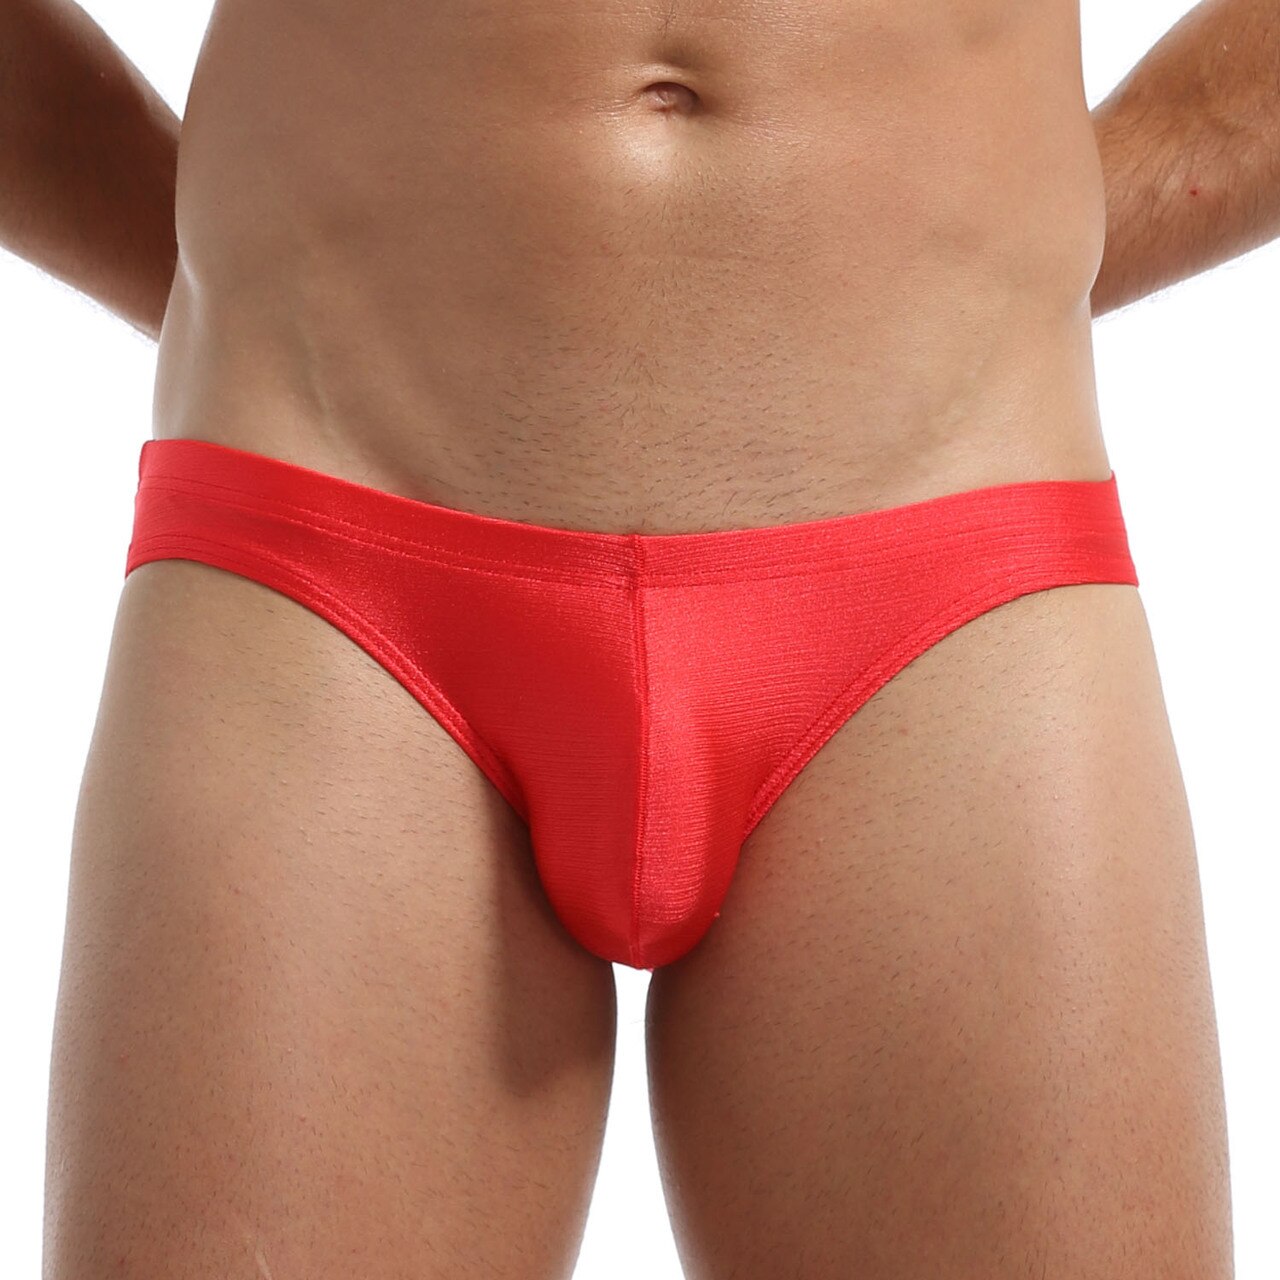 SALE - Mens Soft and Silky Comfortable Poly Bikini Brief Red